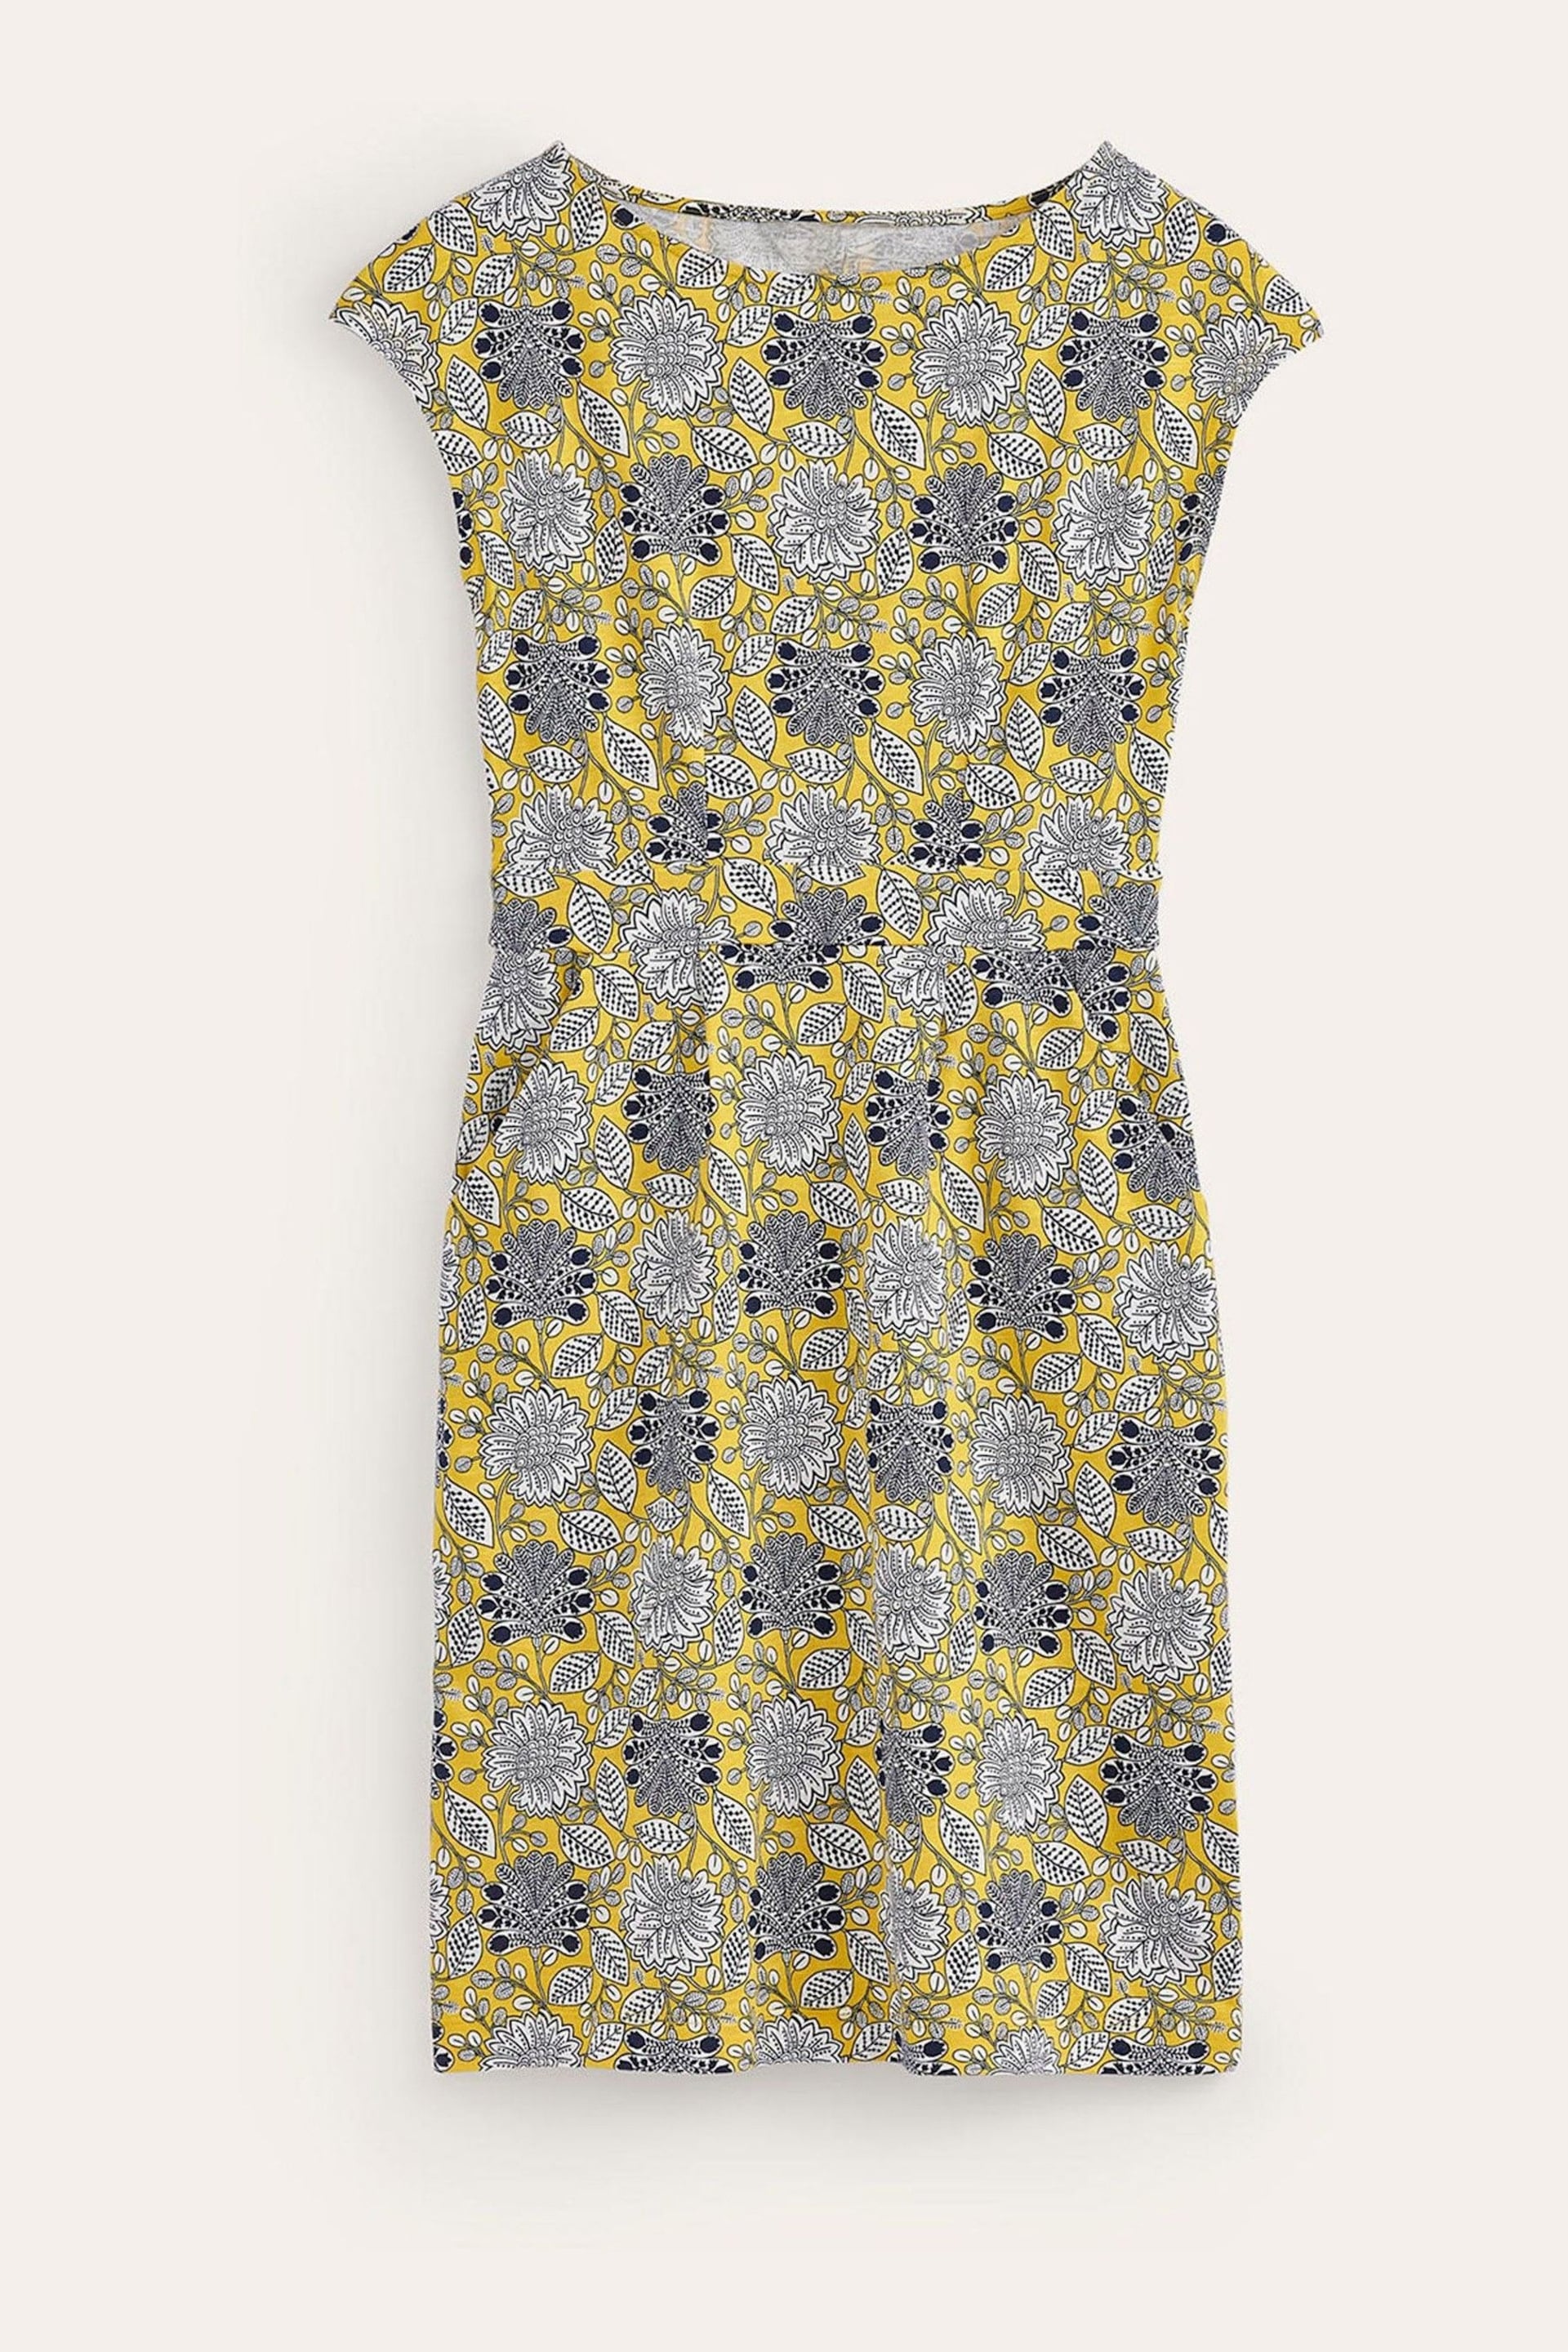 Boden Yellow Florrie Jersey Dress - Image 6 of 6